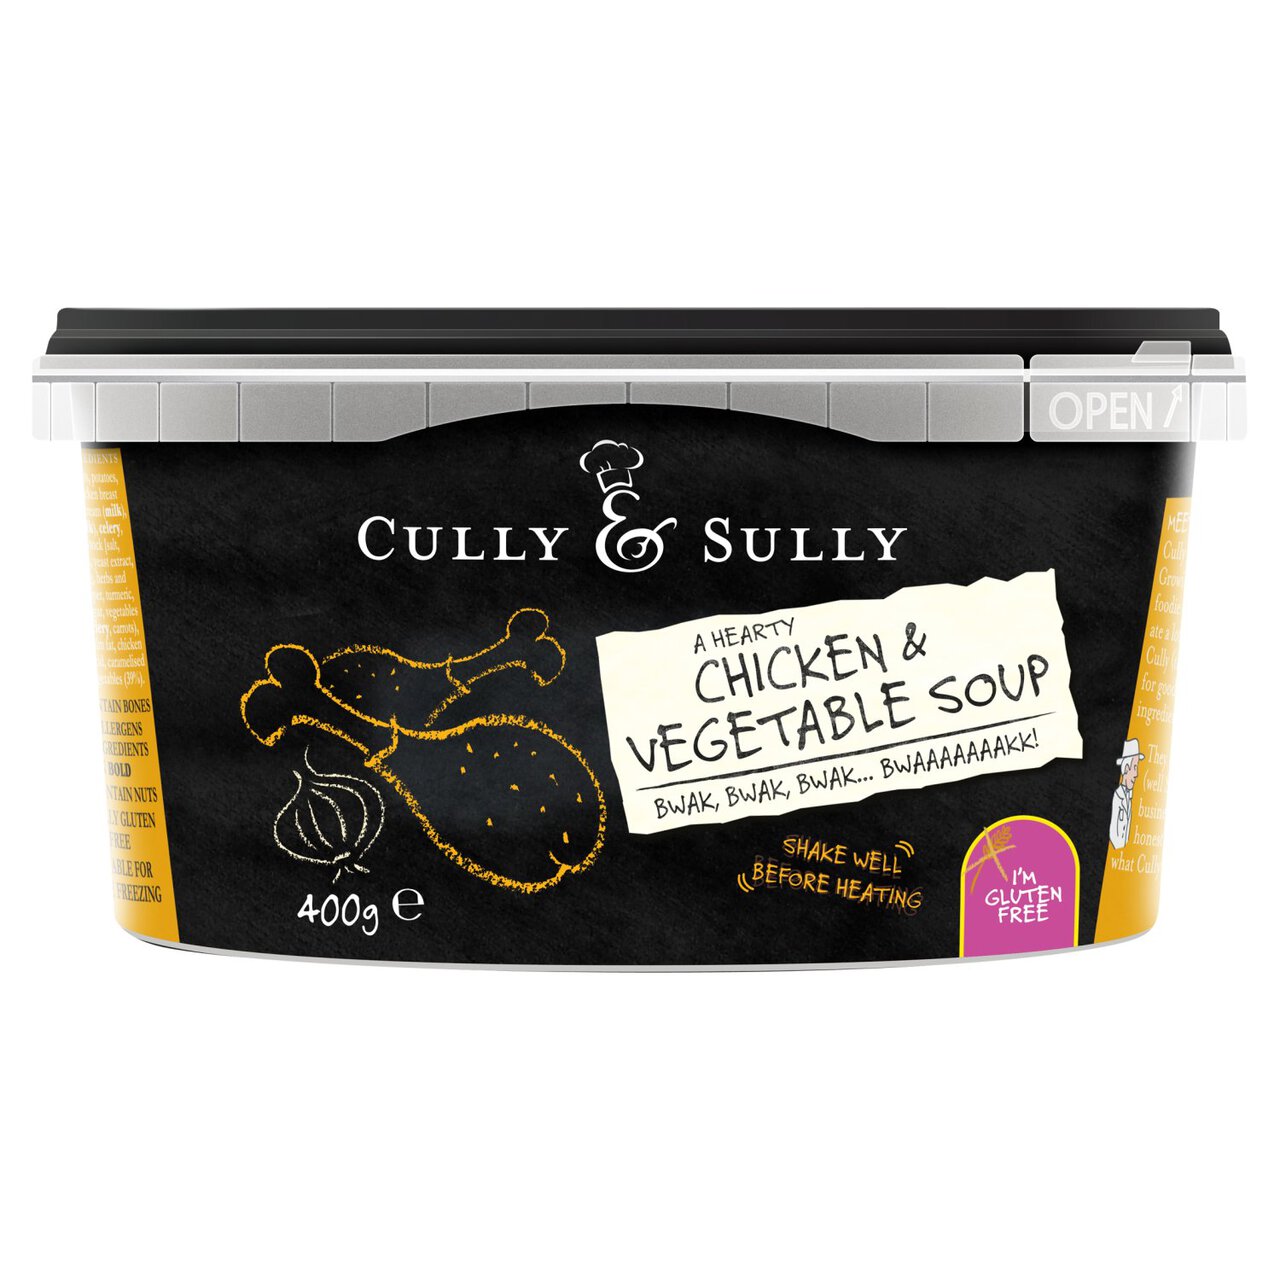 Cully & Sully Chicken & Vegetable Soup 400g